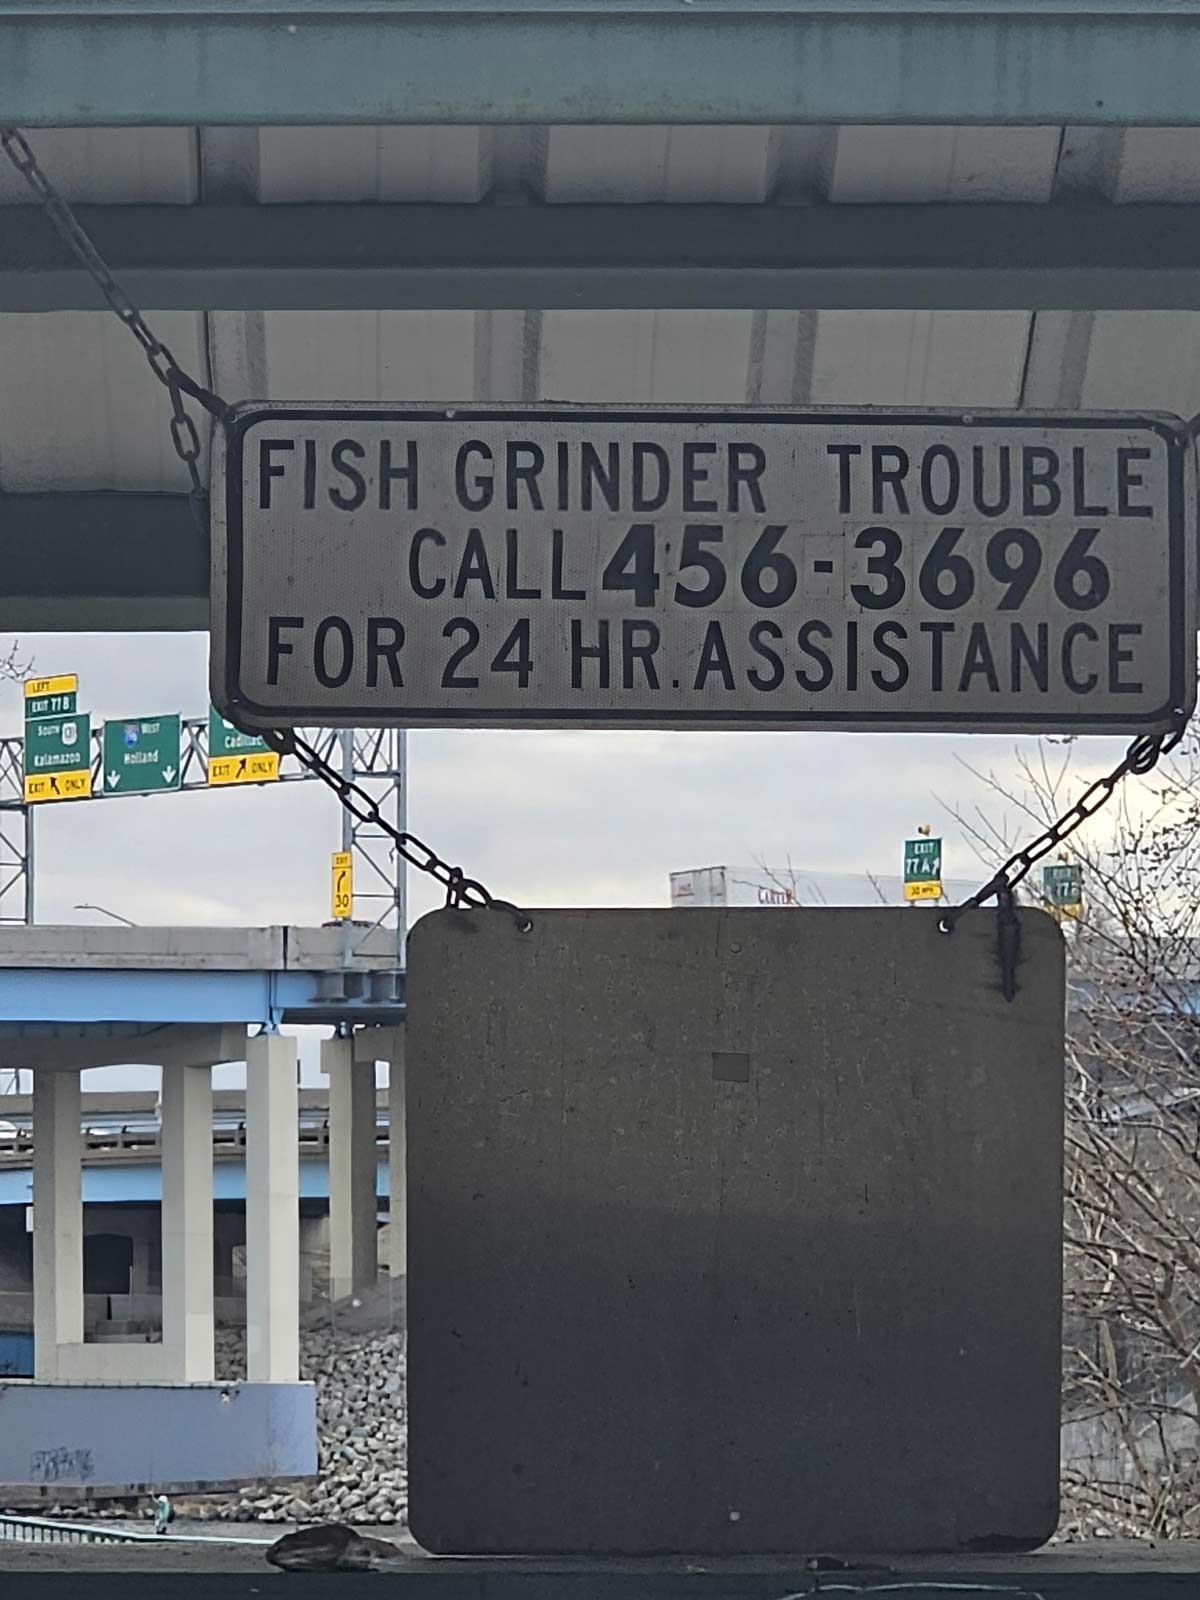 I live in an area with so many gay fish that they have a hotline